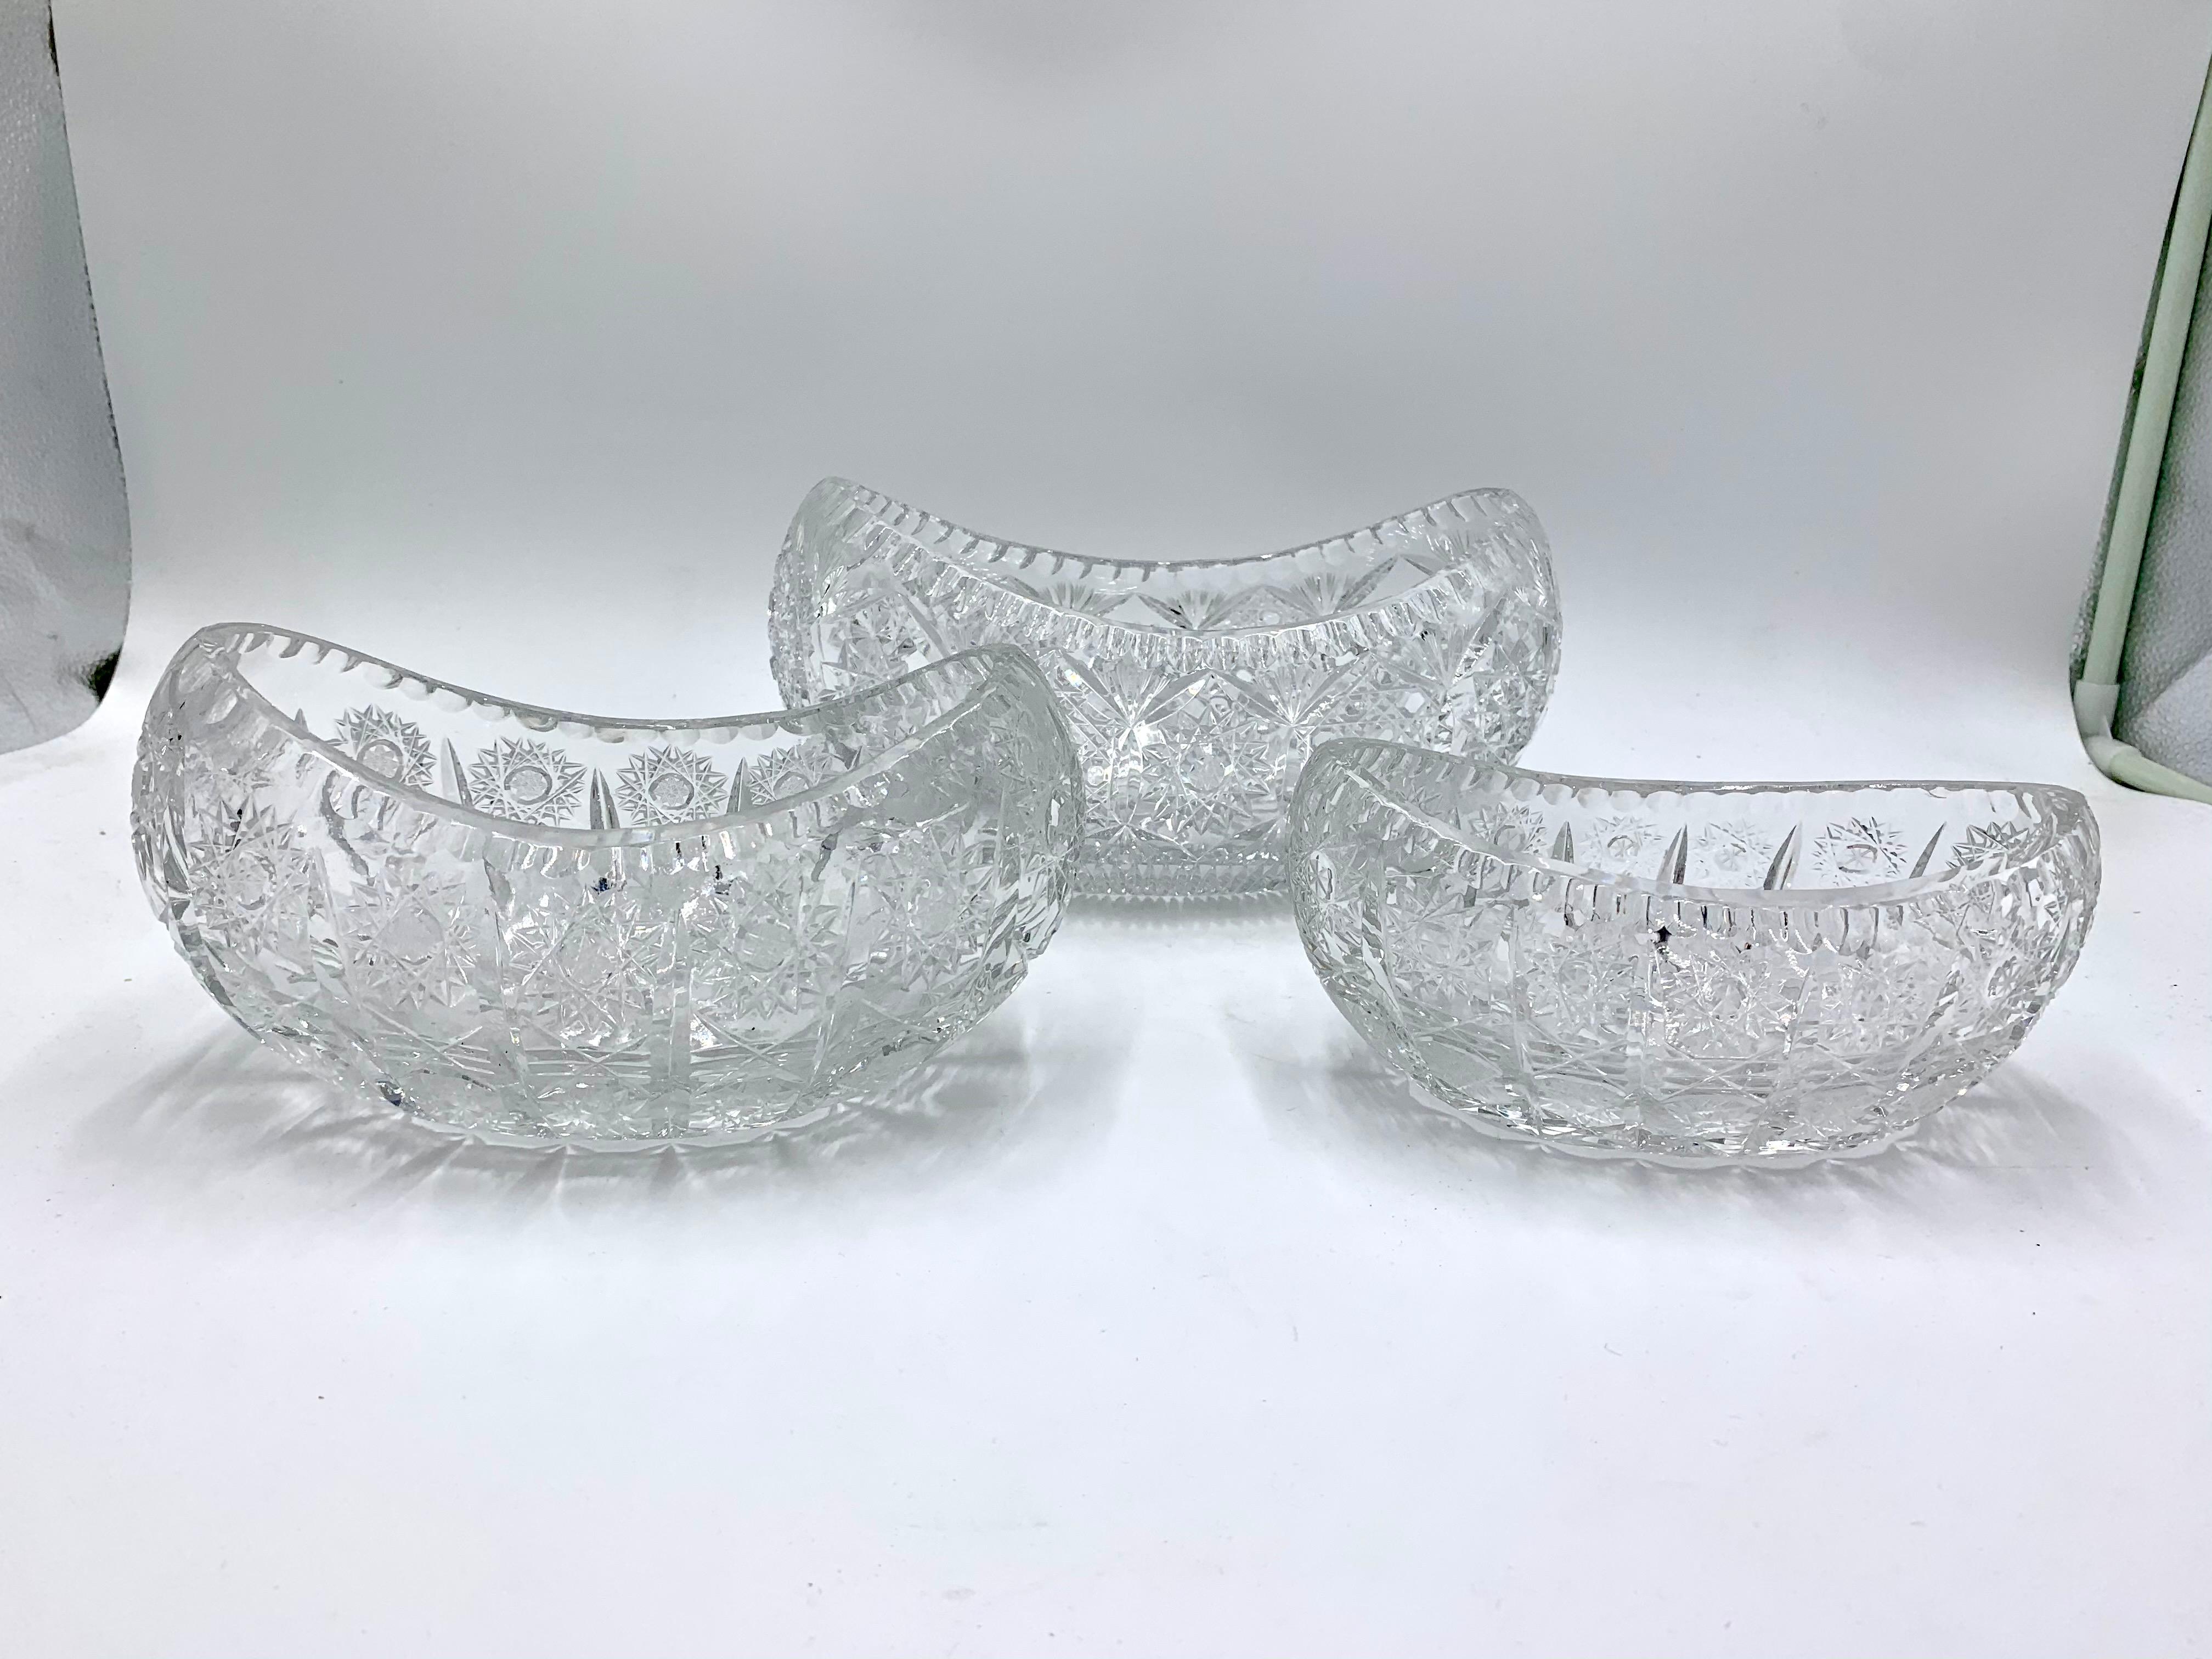 Three crystal oval boat-like decorative bowls
Produced in Poland in 1950s. 
Very good condition 
Measures: The biggest : Height : 14cm width 24cm depth 14cm
Medium : Height 11cm width 21cm depth 11cm 
Small : Height 8cm width 18cm depth 10cm.